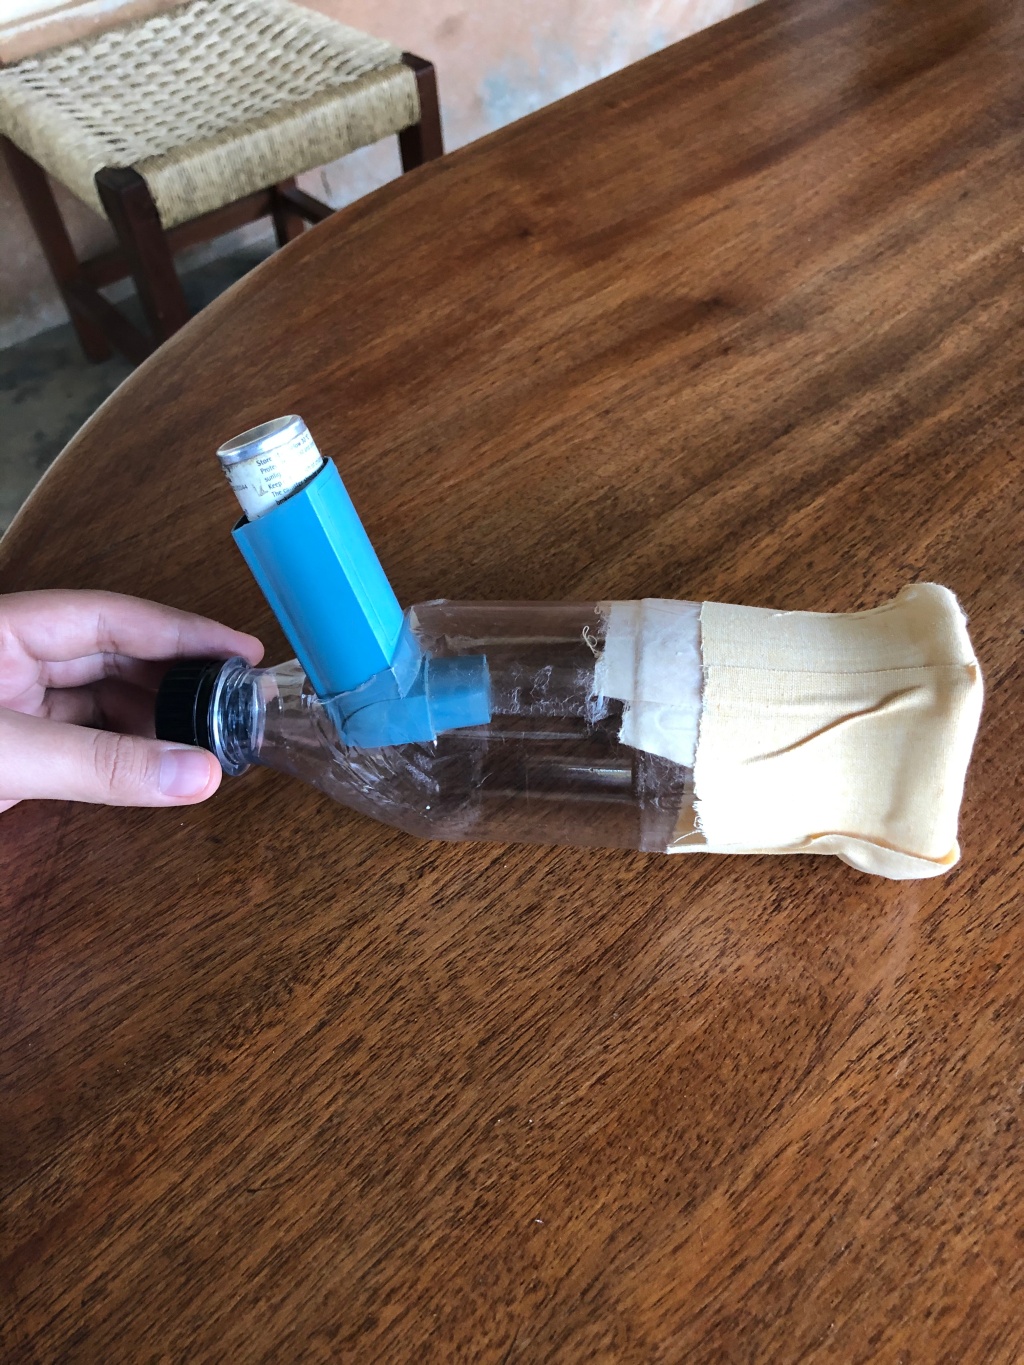 How to Make a Homemade Spacer for an Inhaler – Healthy Global Kids